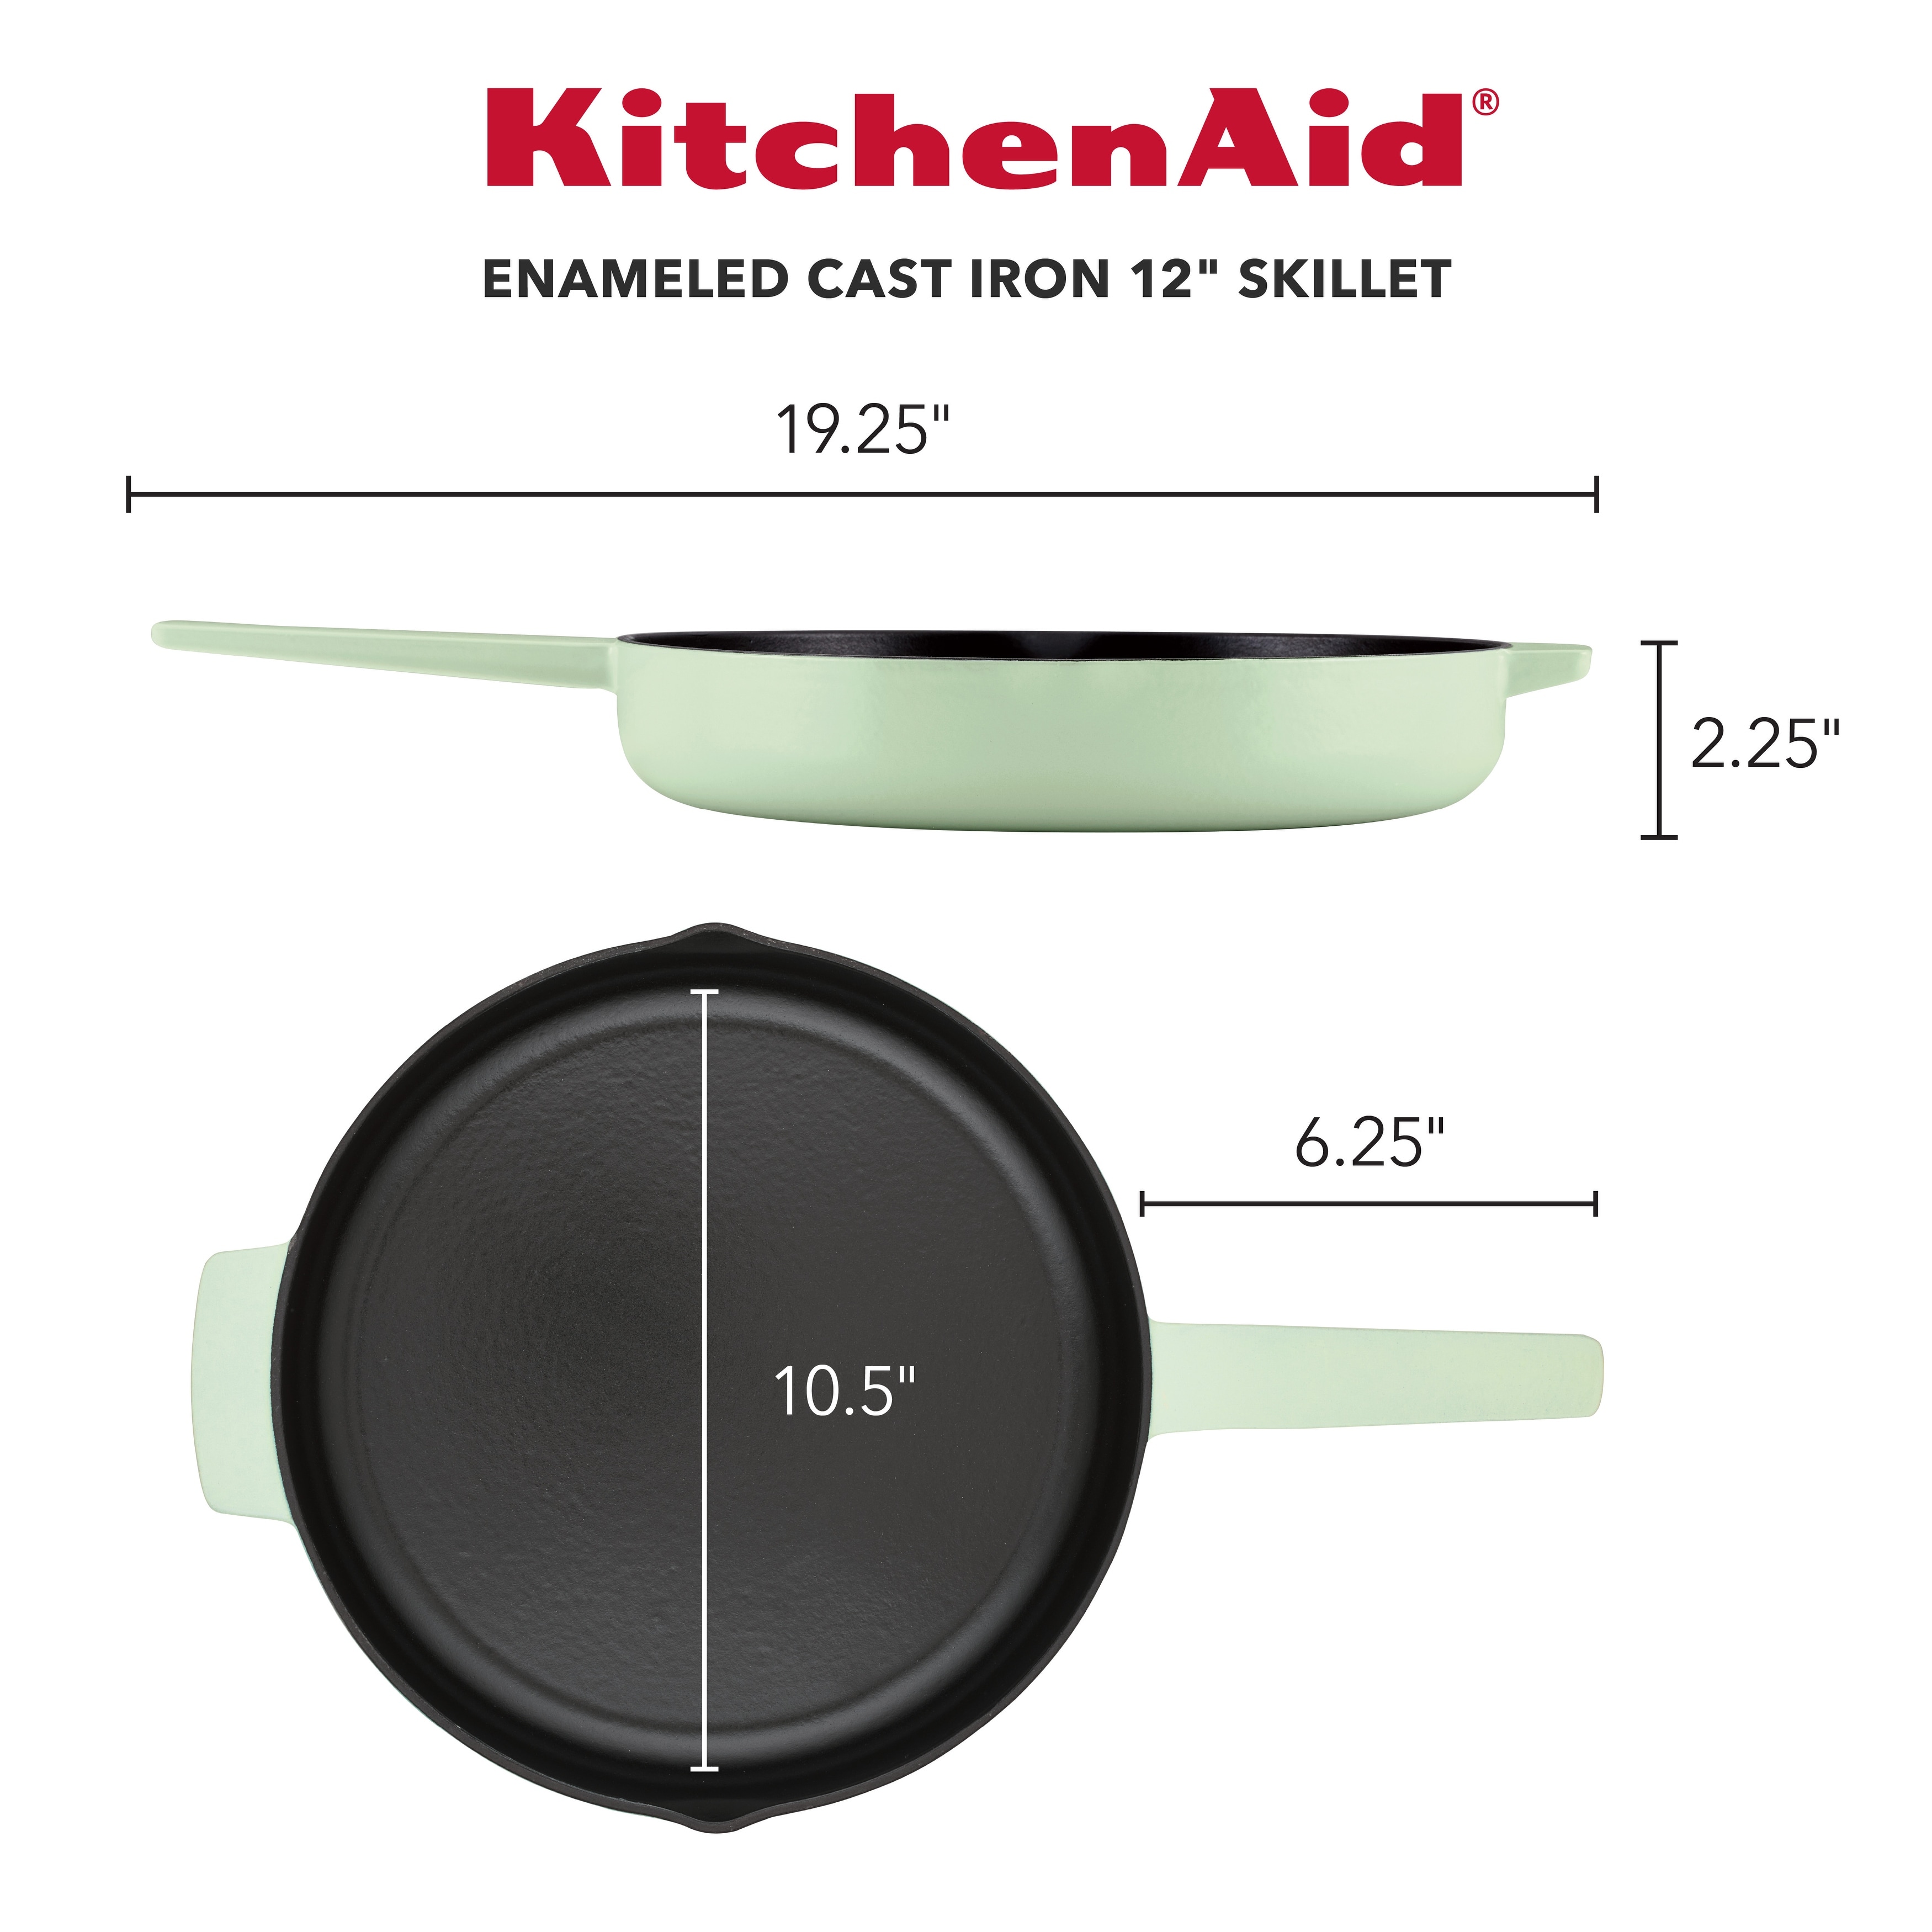 https://ak1.ostkcdn.com/images/products/is/images/direct/276d9b1206e5f367896748d4a23f1754202b9b59/KitchenAid-Enameled-Cast-Iron-Induction-Skillet-with-Helper-Handle-and-Pour-Spouts%2C-12-Inch%2C-Blue-Velvet.jpg